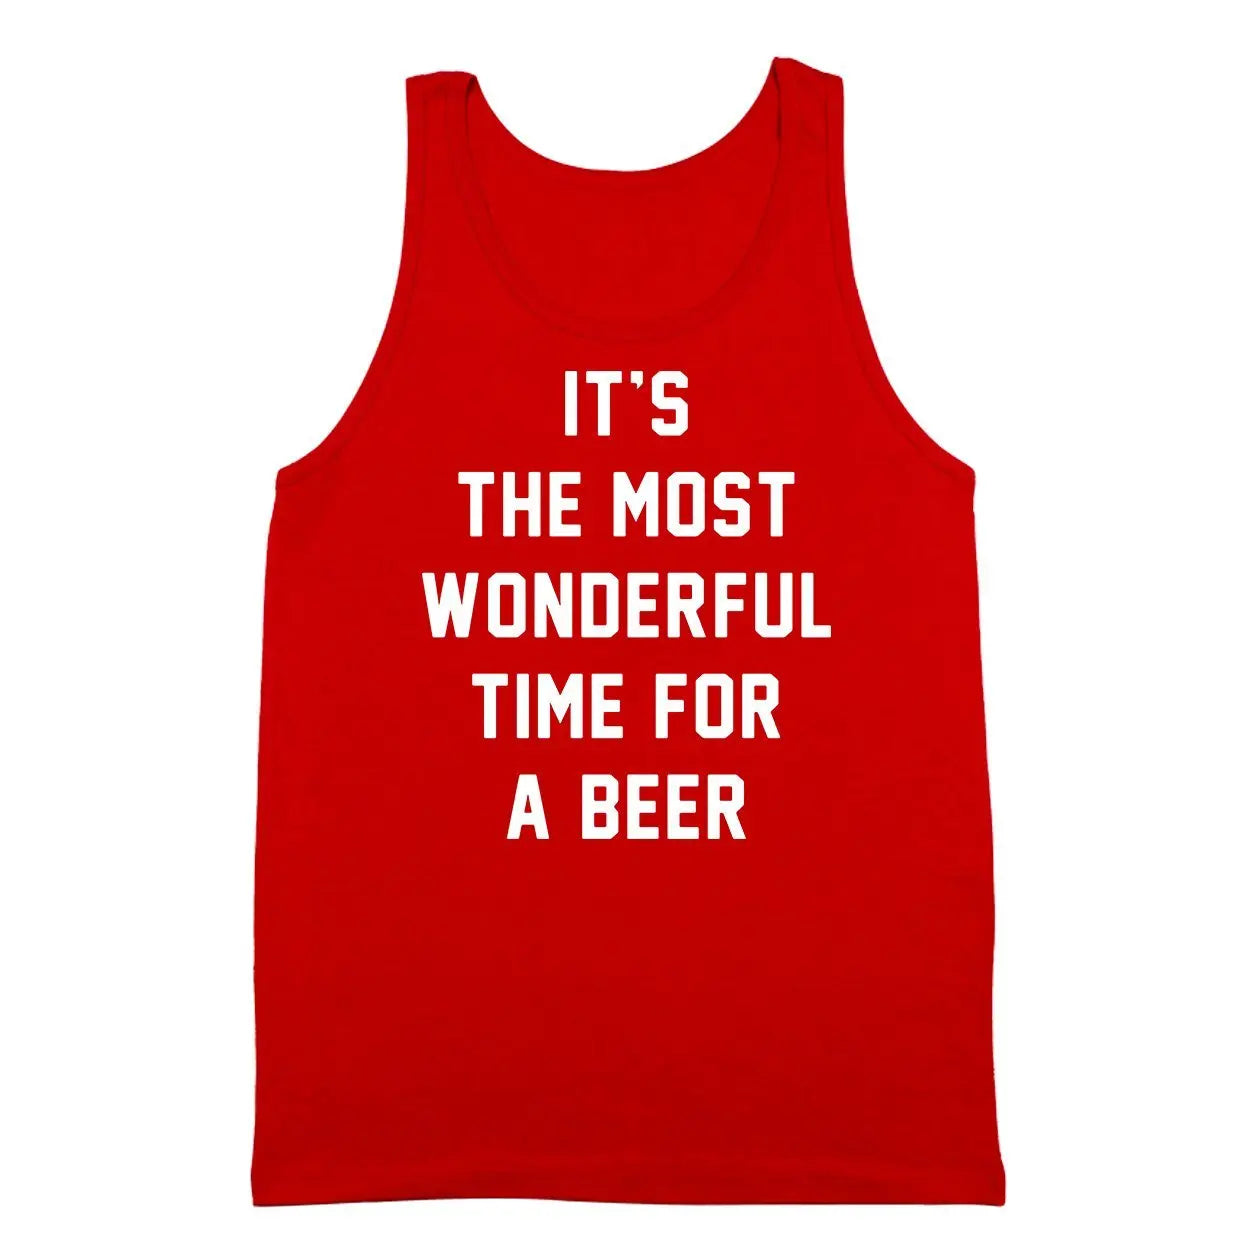 The Most Wonderful Time For A Beer Tshirt - Donkey Tees